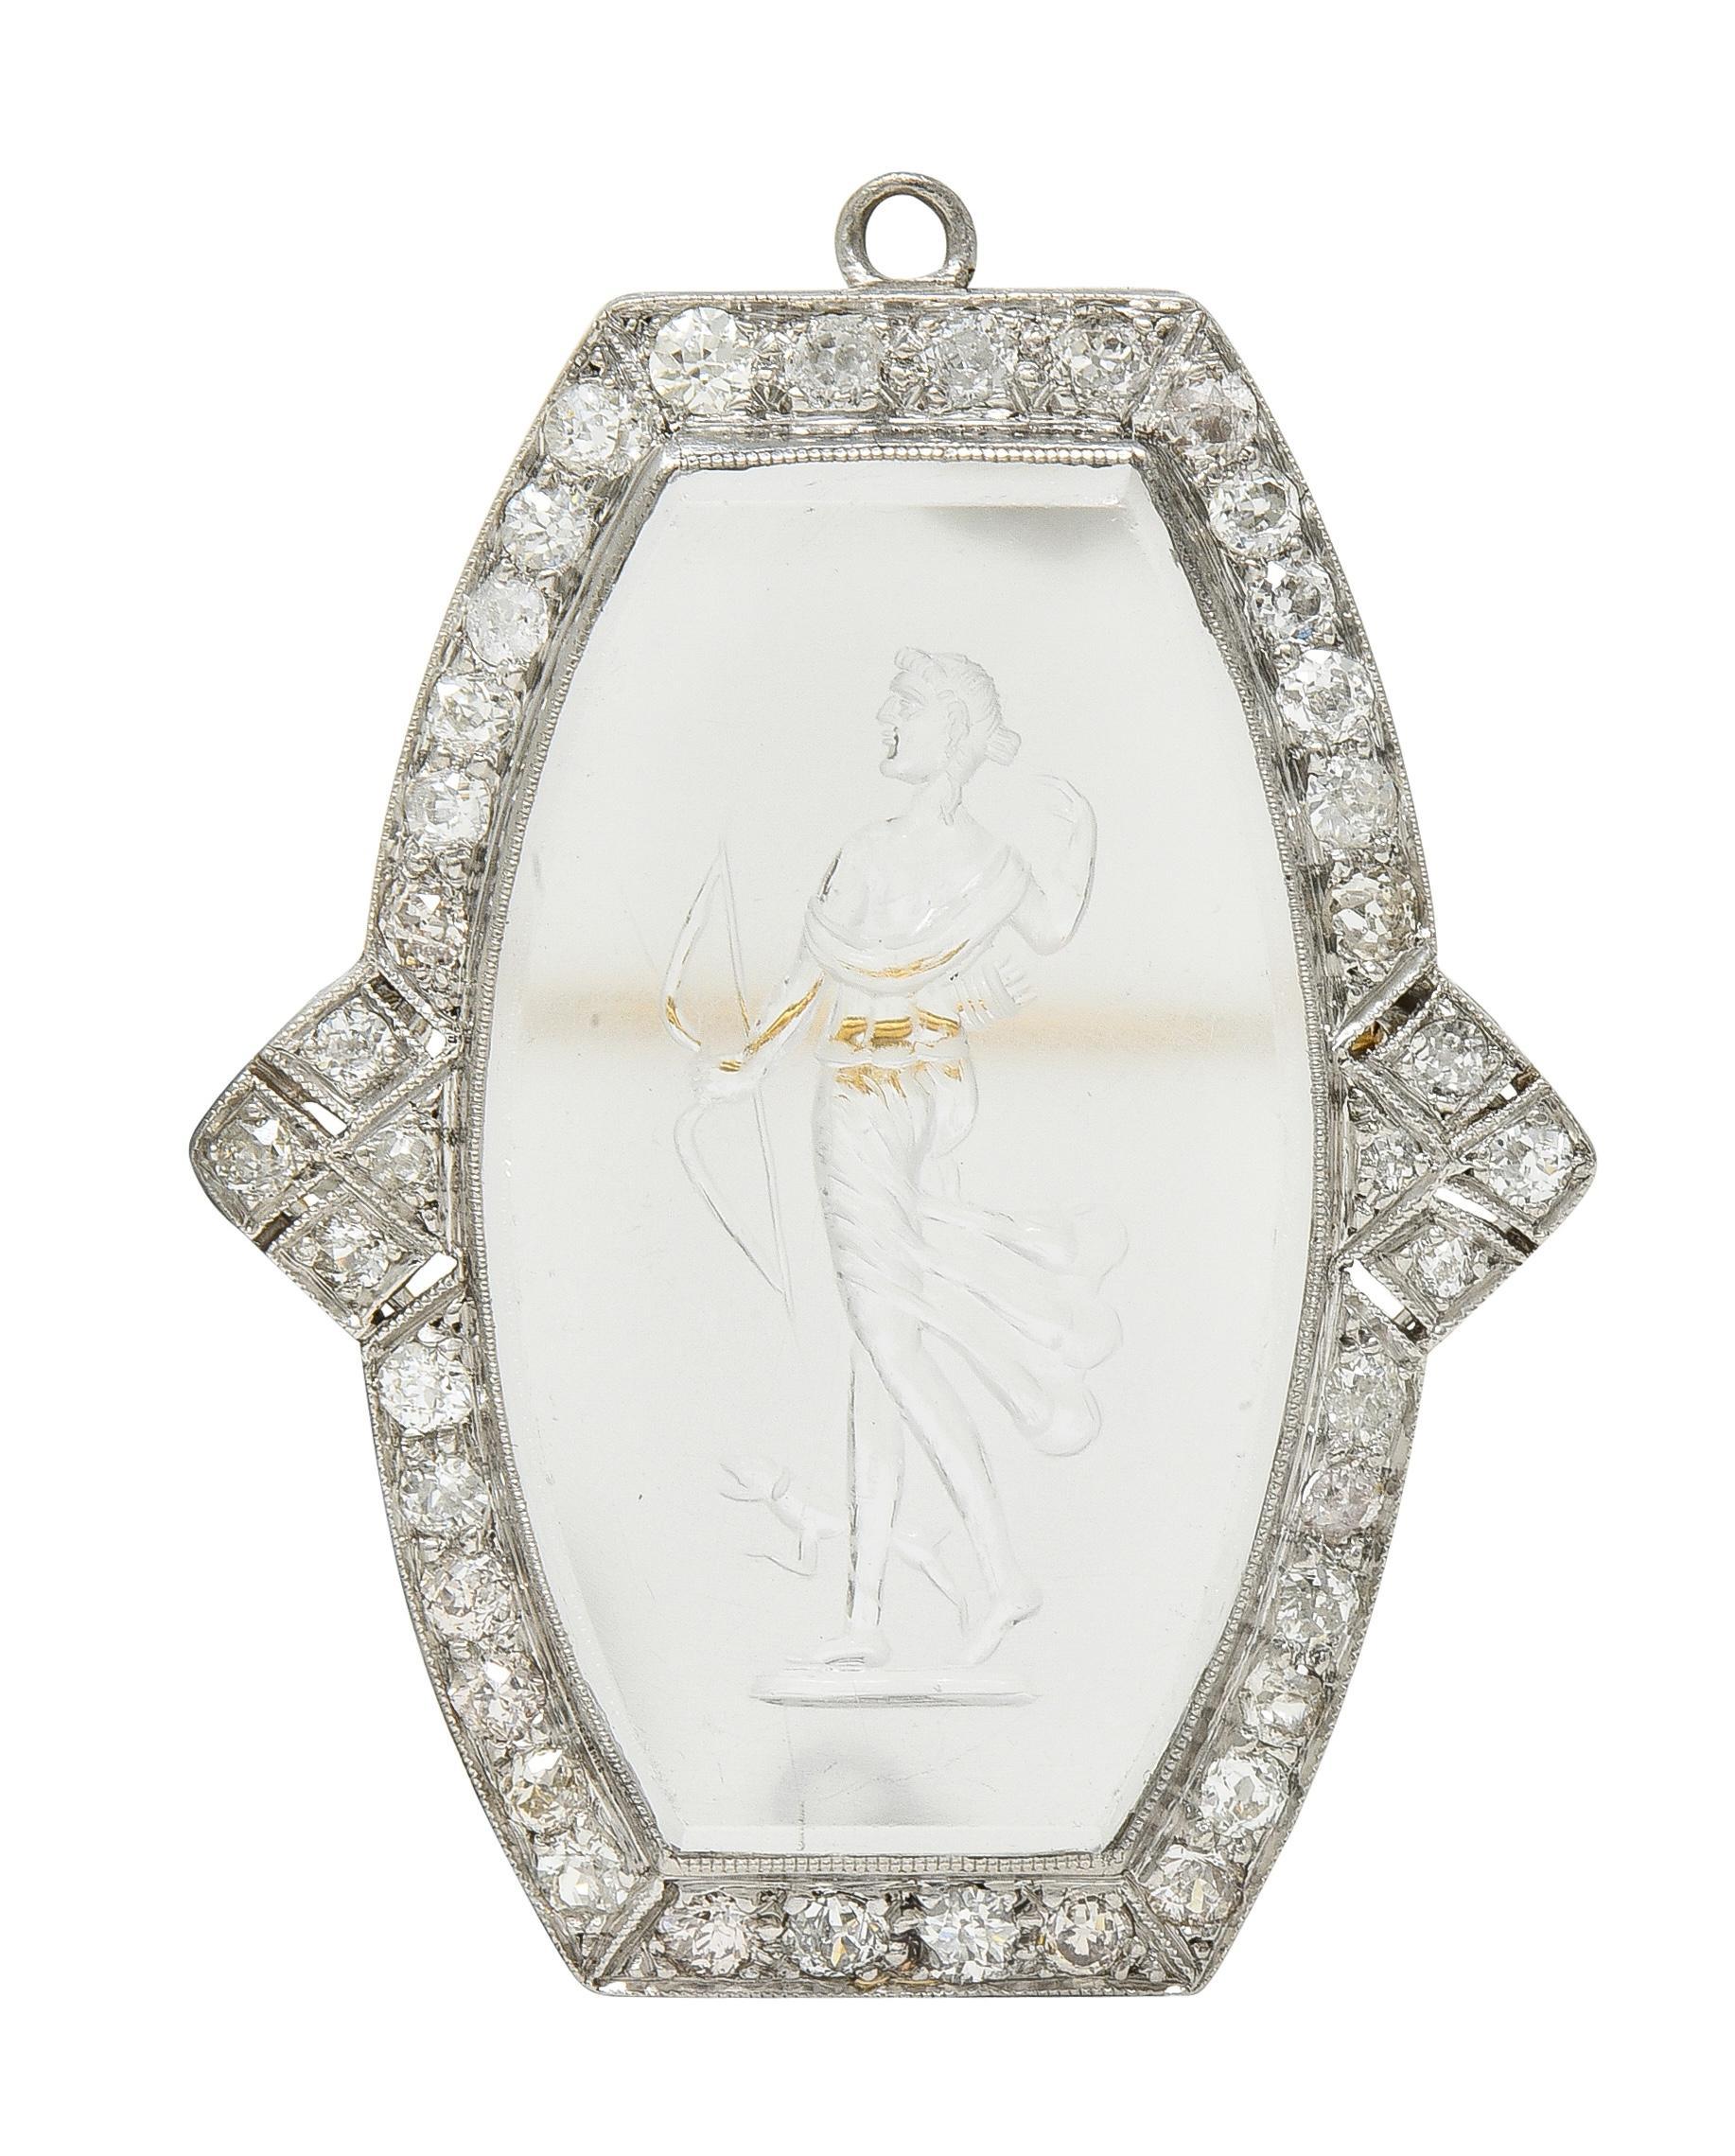 Centering an elongated cushion-shaped tablet of transparent and partially frosted rock crystal 
Carved to depict the Greek goddess Artemis walking with a dog and carrying a bow
Measuring 19.0 x 32.0 mm - set in milgrain bezel with halo